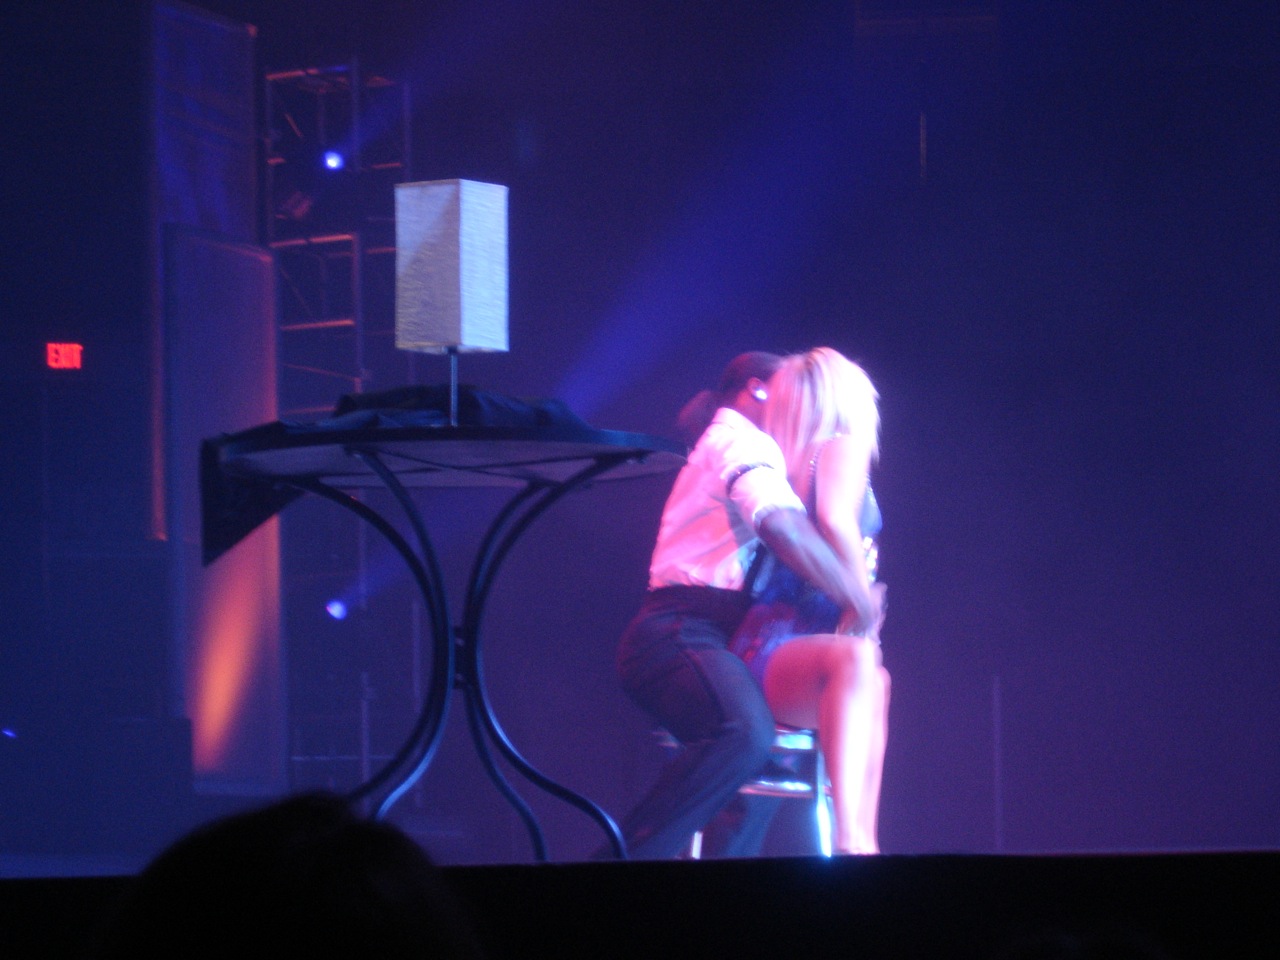 a person kneeling down next to a small table on a stage